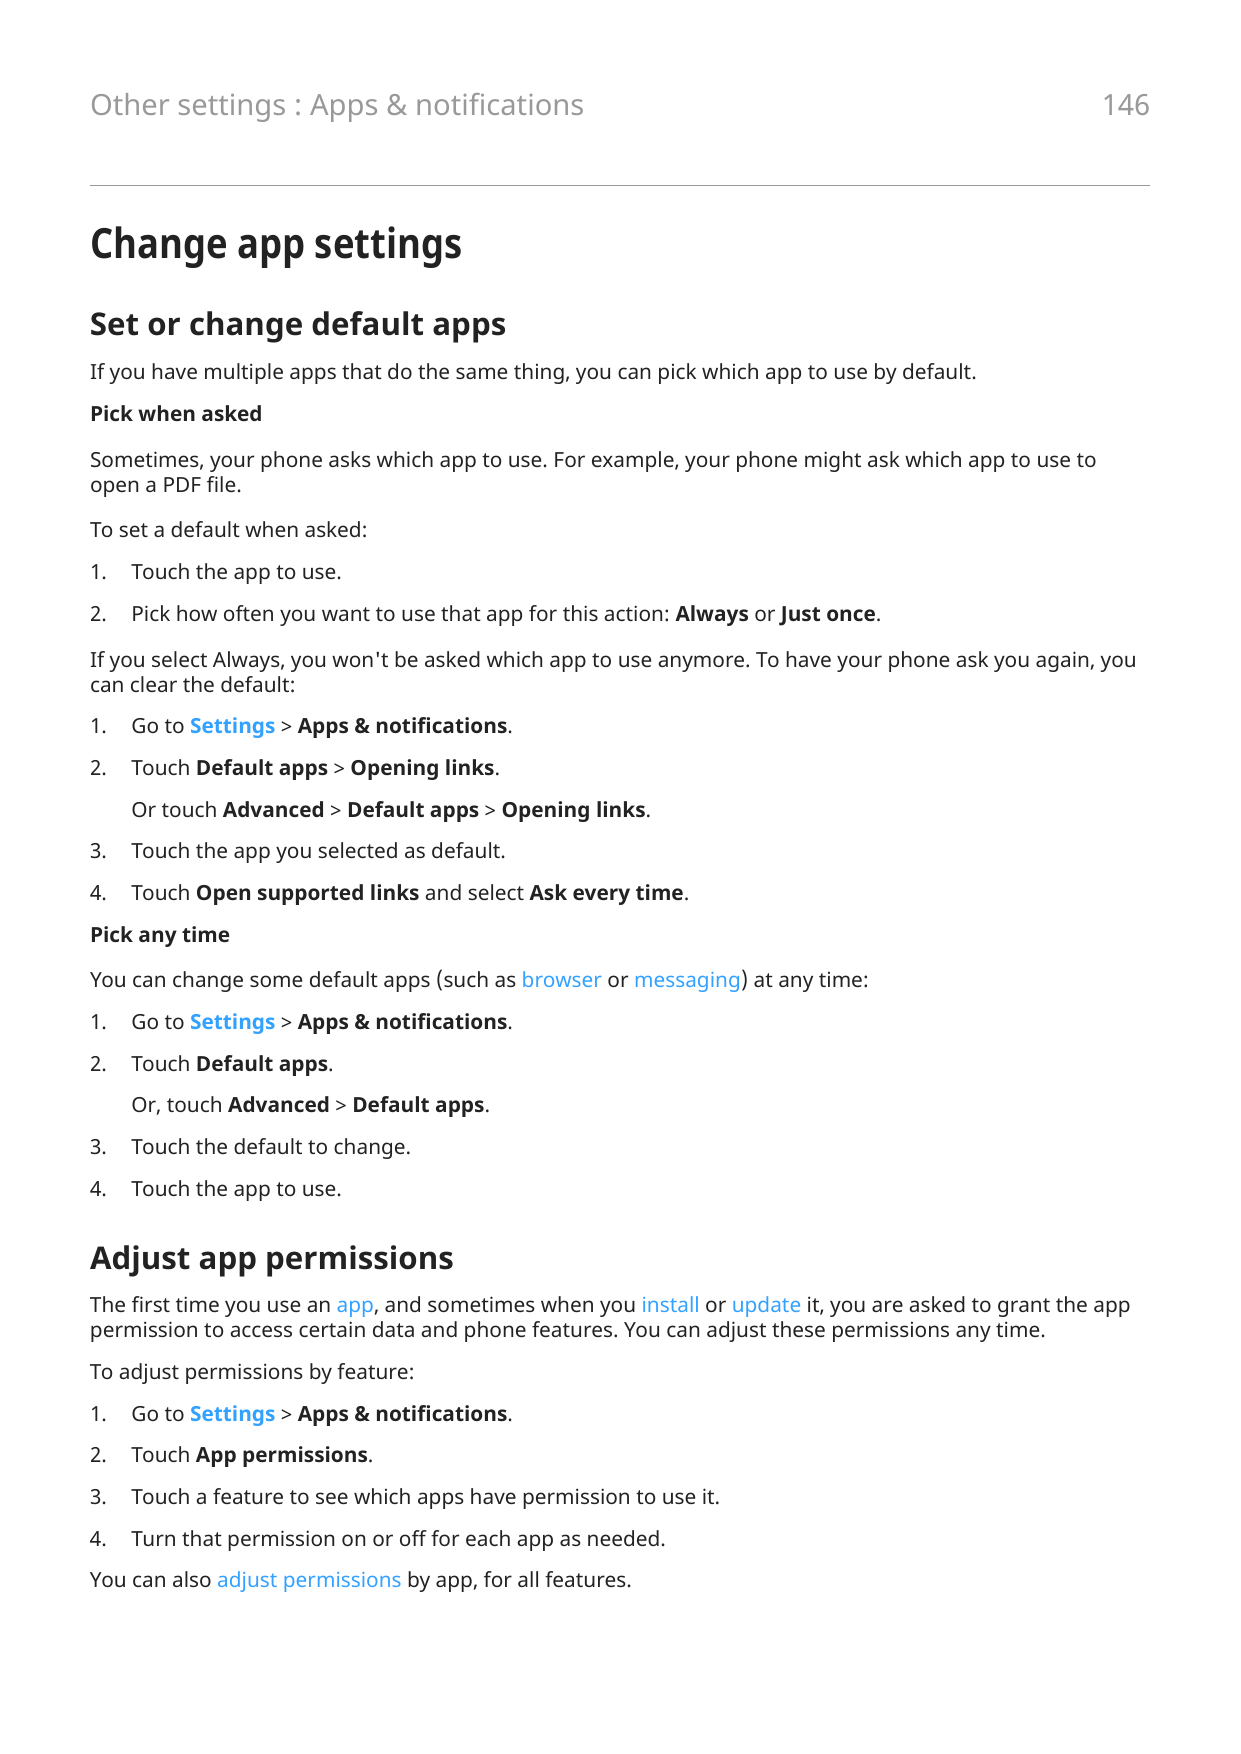 Other settings : Apps & notifications146Change app settingsSet or change default appsIf you have multiple apps that do the same 